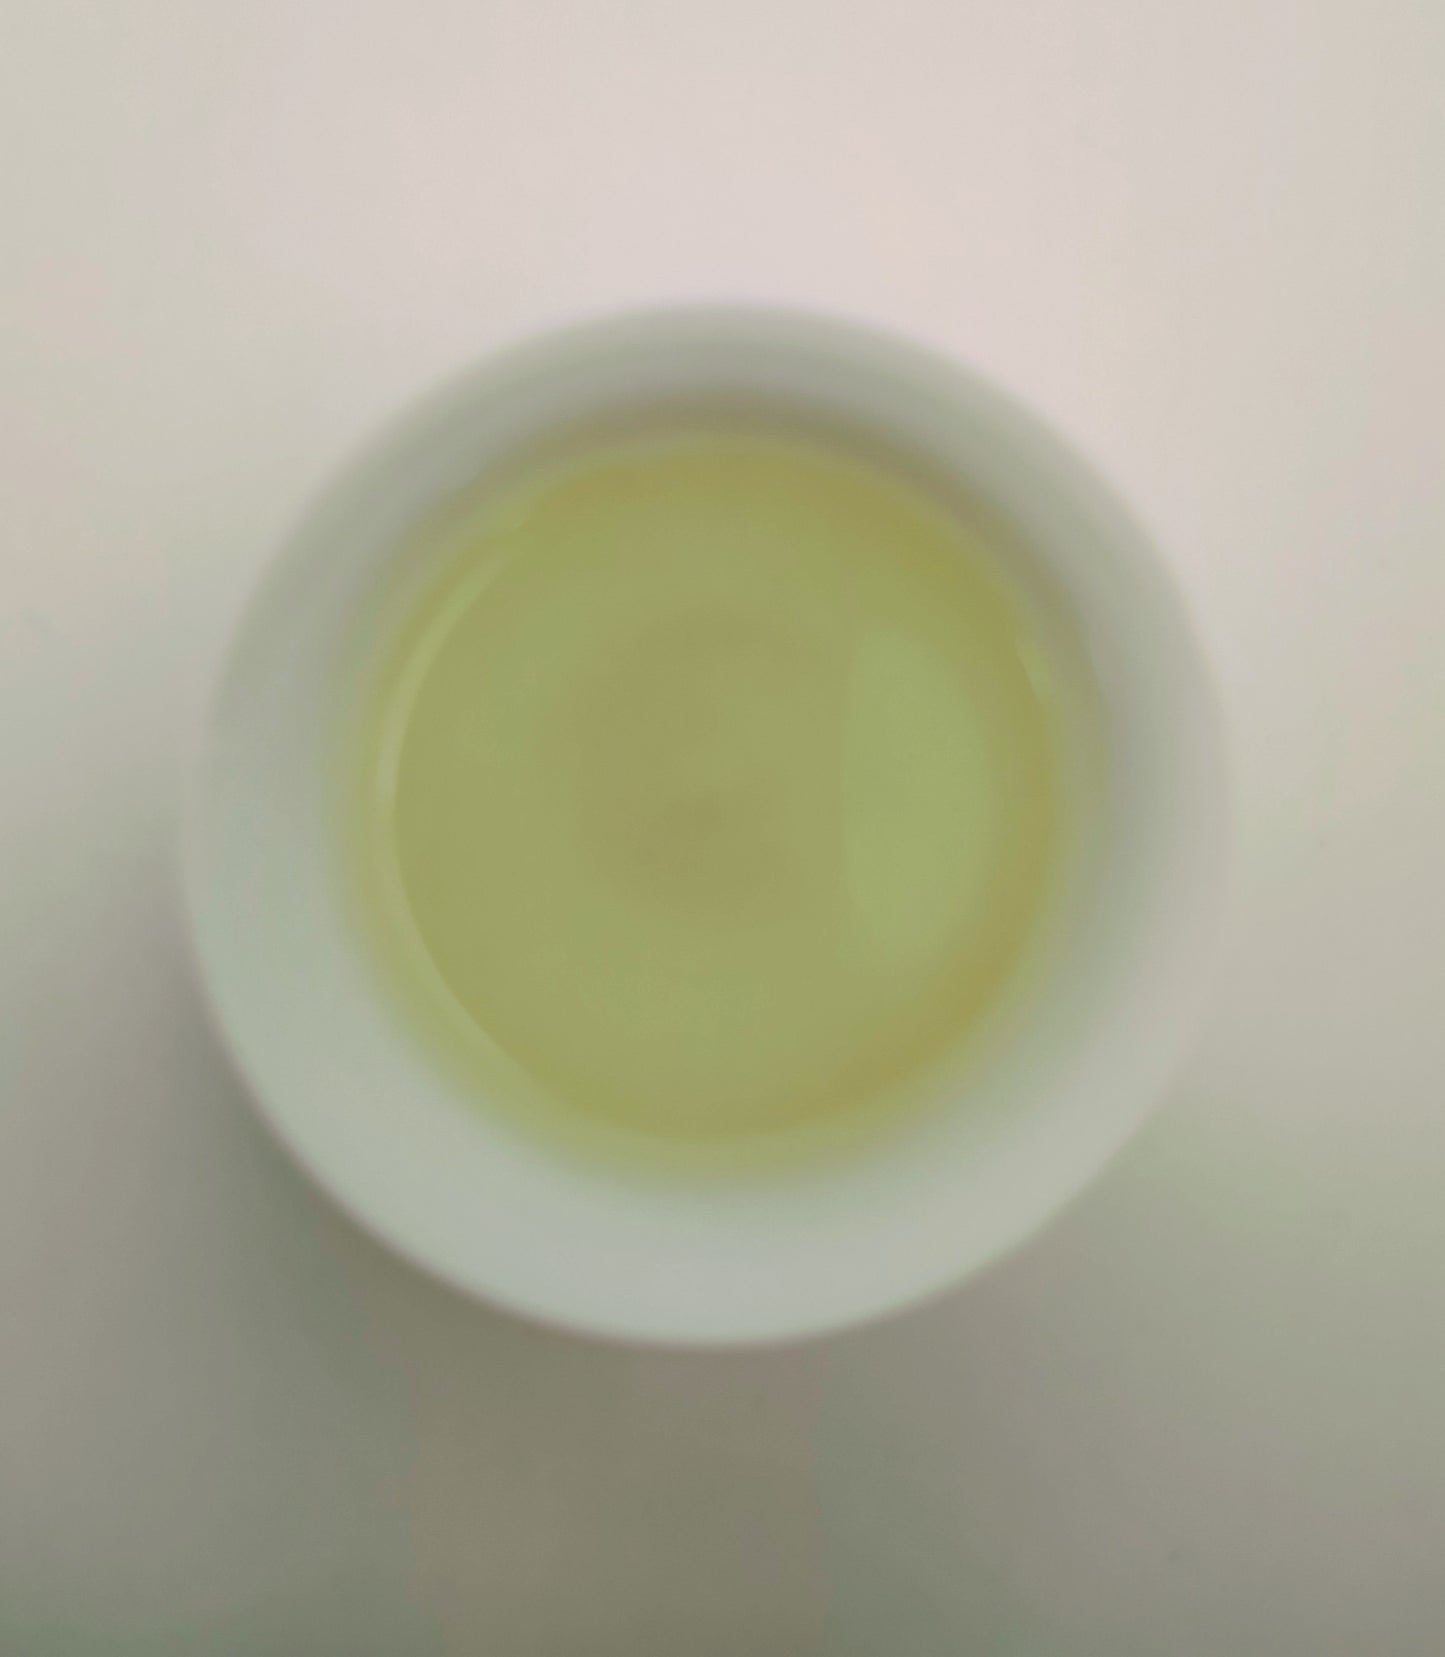 Picture of brewed green tea in a small cup, Yun Wu.